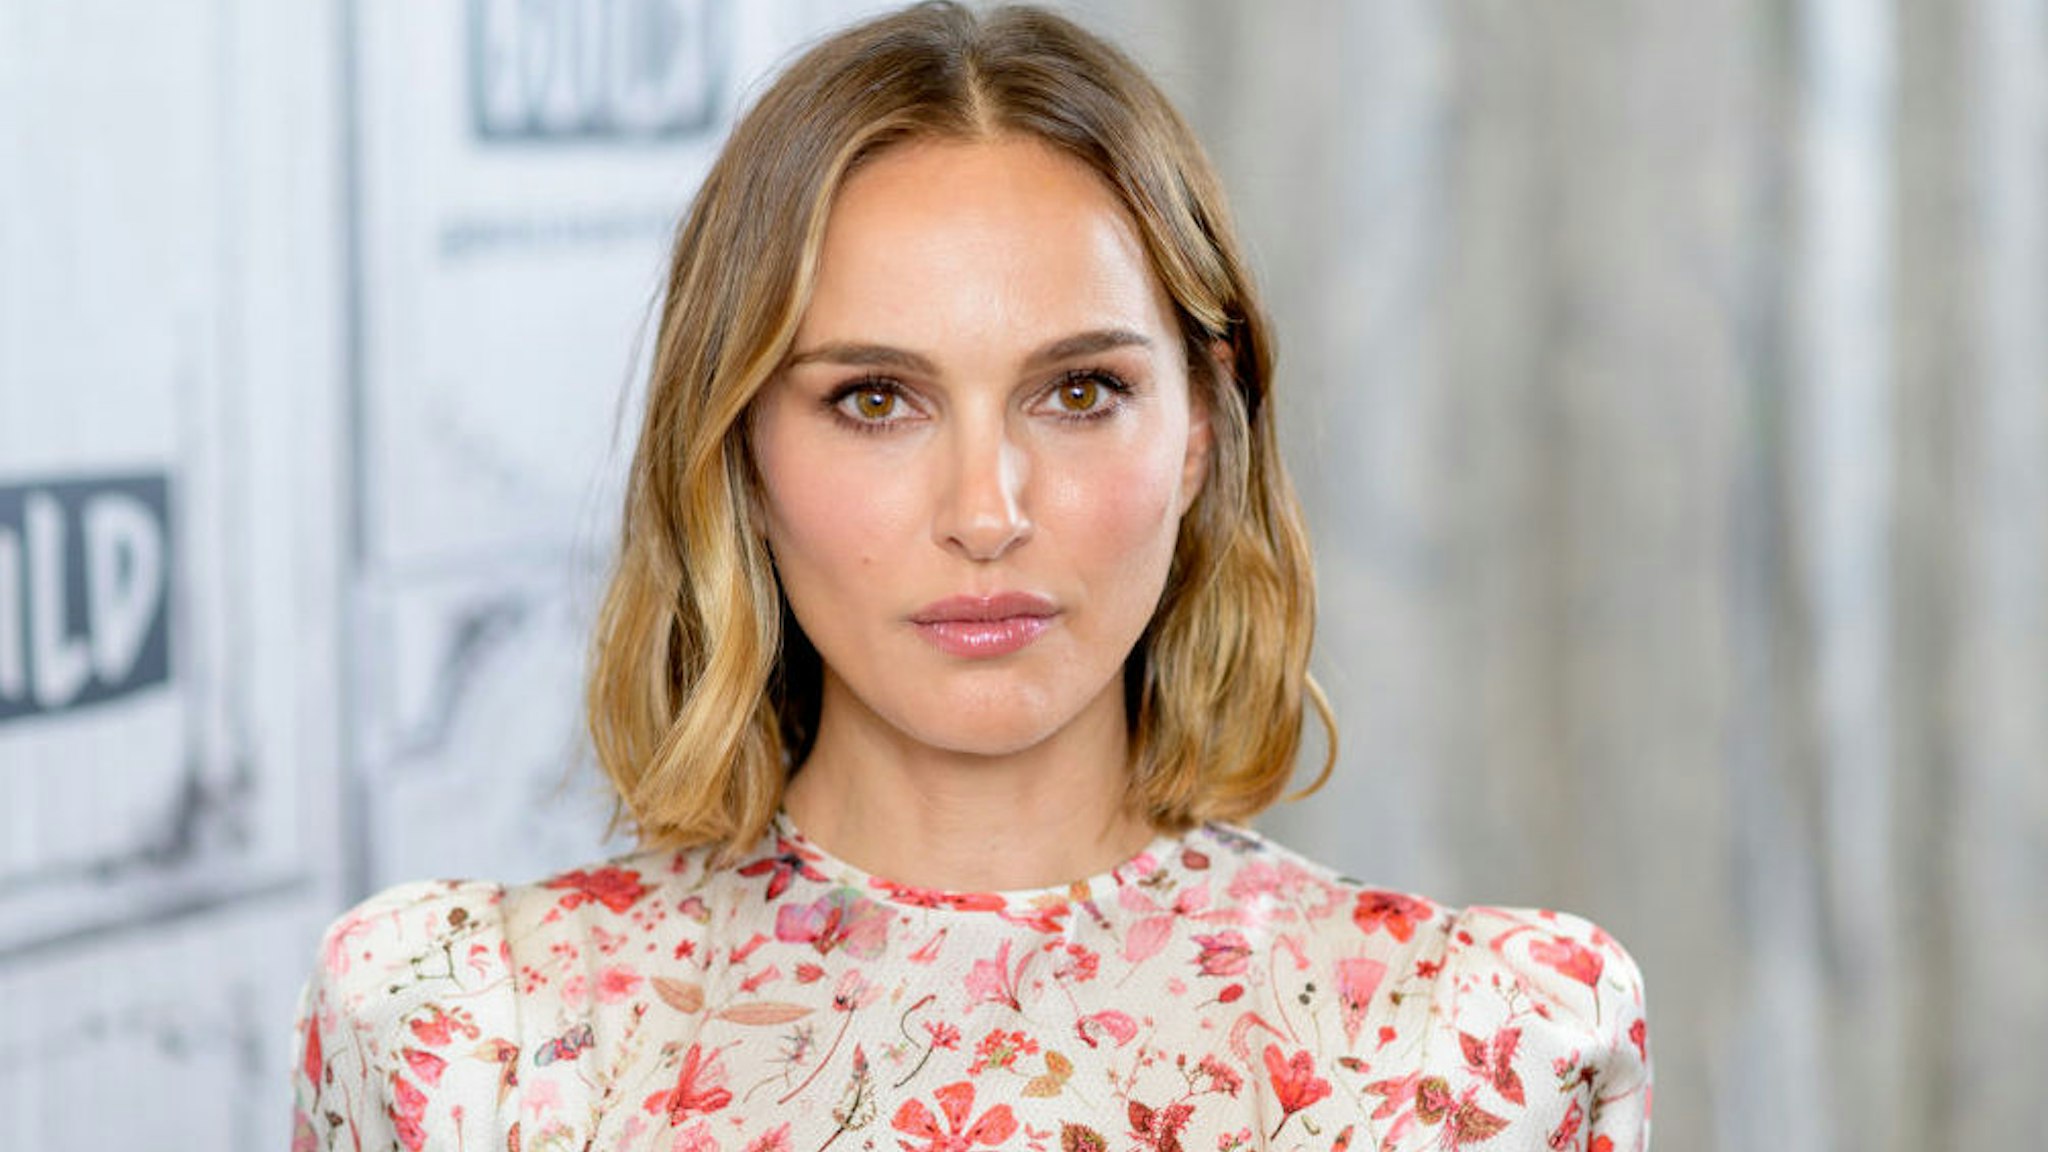 Actress Natalie Portman discusses "Lucy in the Sky" with the Build Series at Build Studio on October 02, 2019 in New York City.